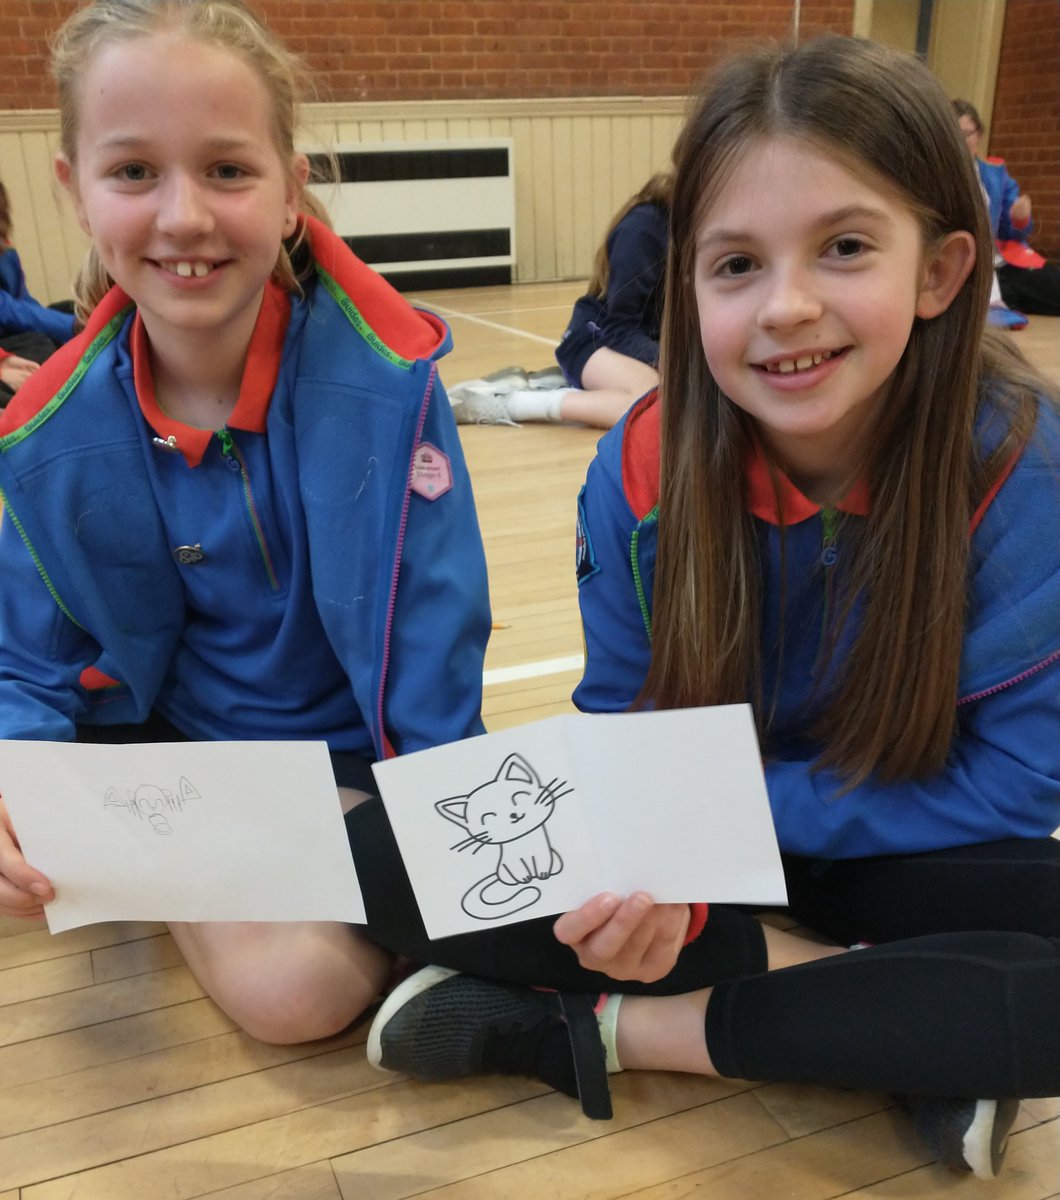 Last week we used we used some great resources from @Girlguiding and @alzheimerssoc, to learn more about dementia. We completed the ‘Drawing Distractions’ unit meeting activity, and also found out how to be ‘Dementia Friends’ #DementiaActionWeek